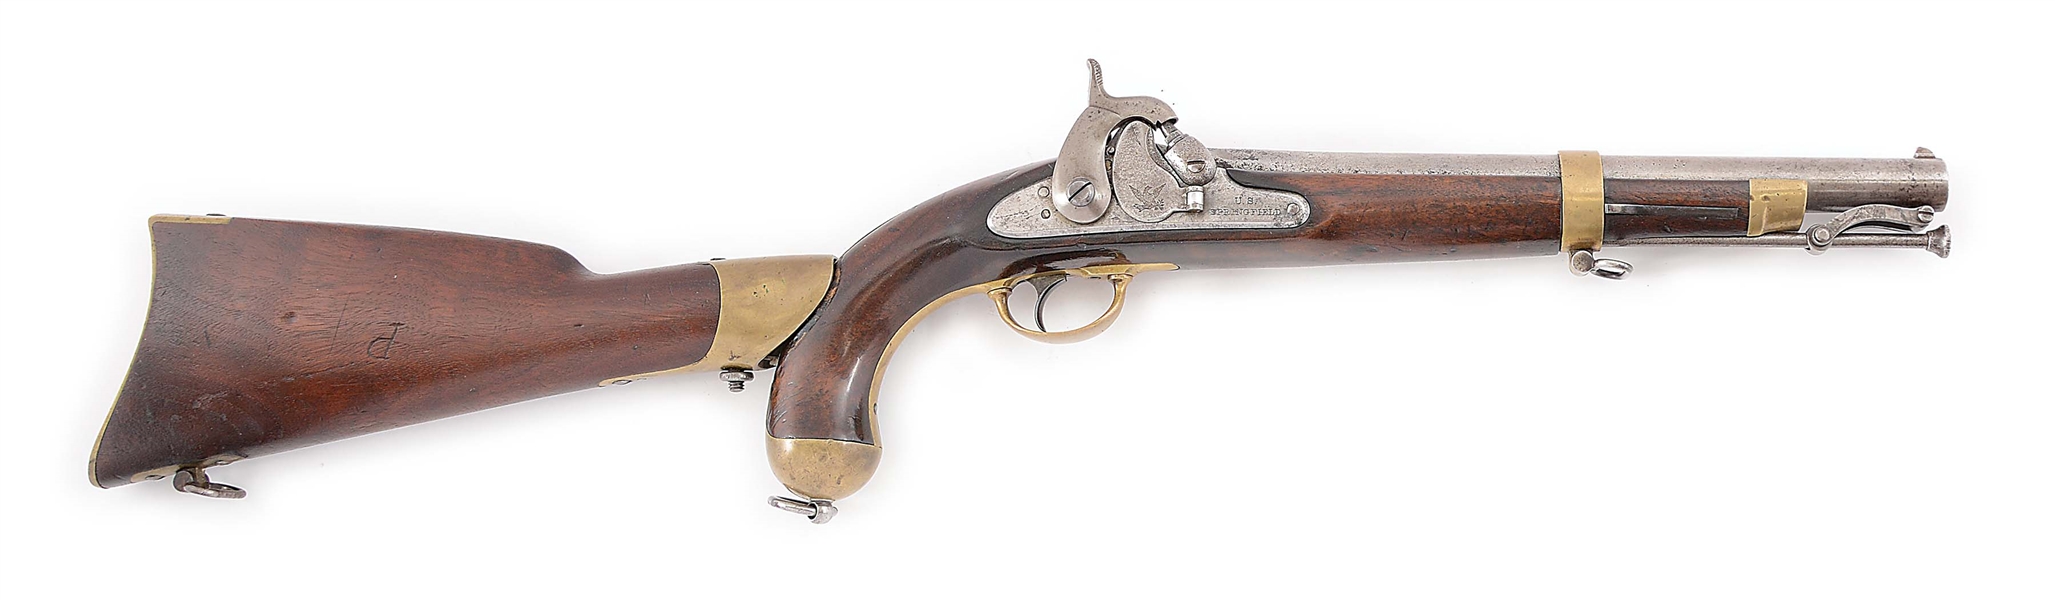 (A) A SPRINGFIELD MODEL 1855 SINGLE SHOT MARTIAL PISTOL WITH SHOULDER STOCK AND 12" RIFLED BARREL, DATED 1855. FURTHER STAMPED ON TOP FLAT SC FOR SOUTH CAROLINA, INDICATING POSSIBLE CONFEDERATE USE.